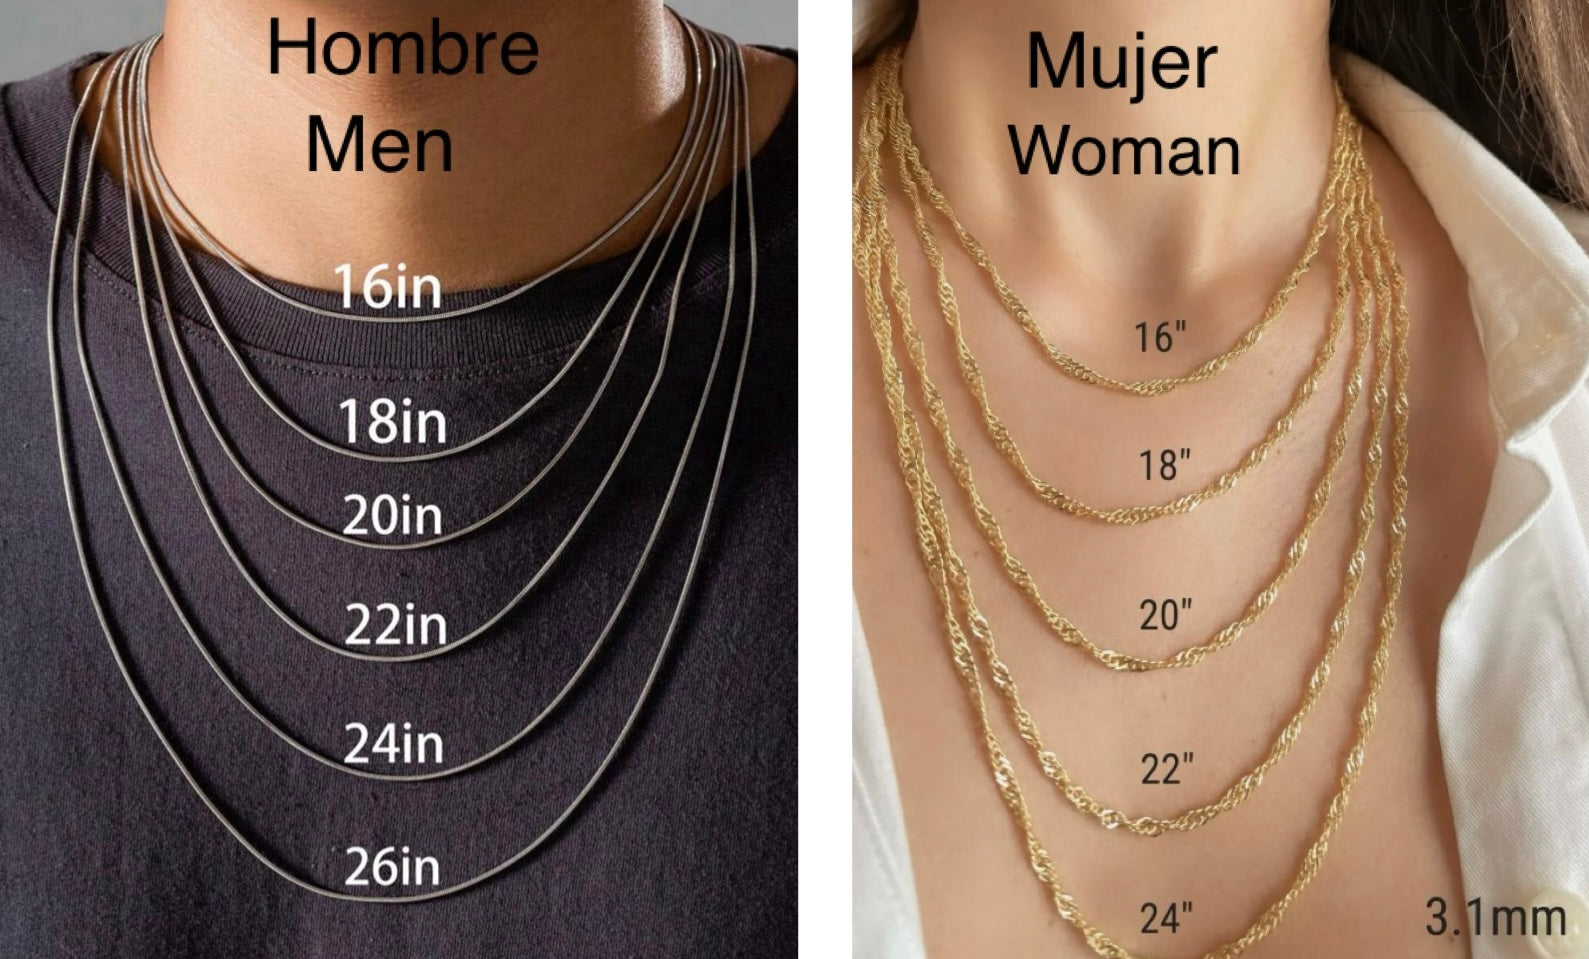 14k 4mm Rope Chain